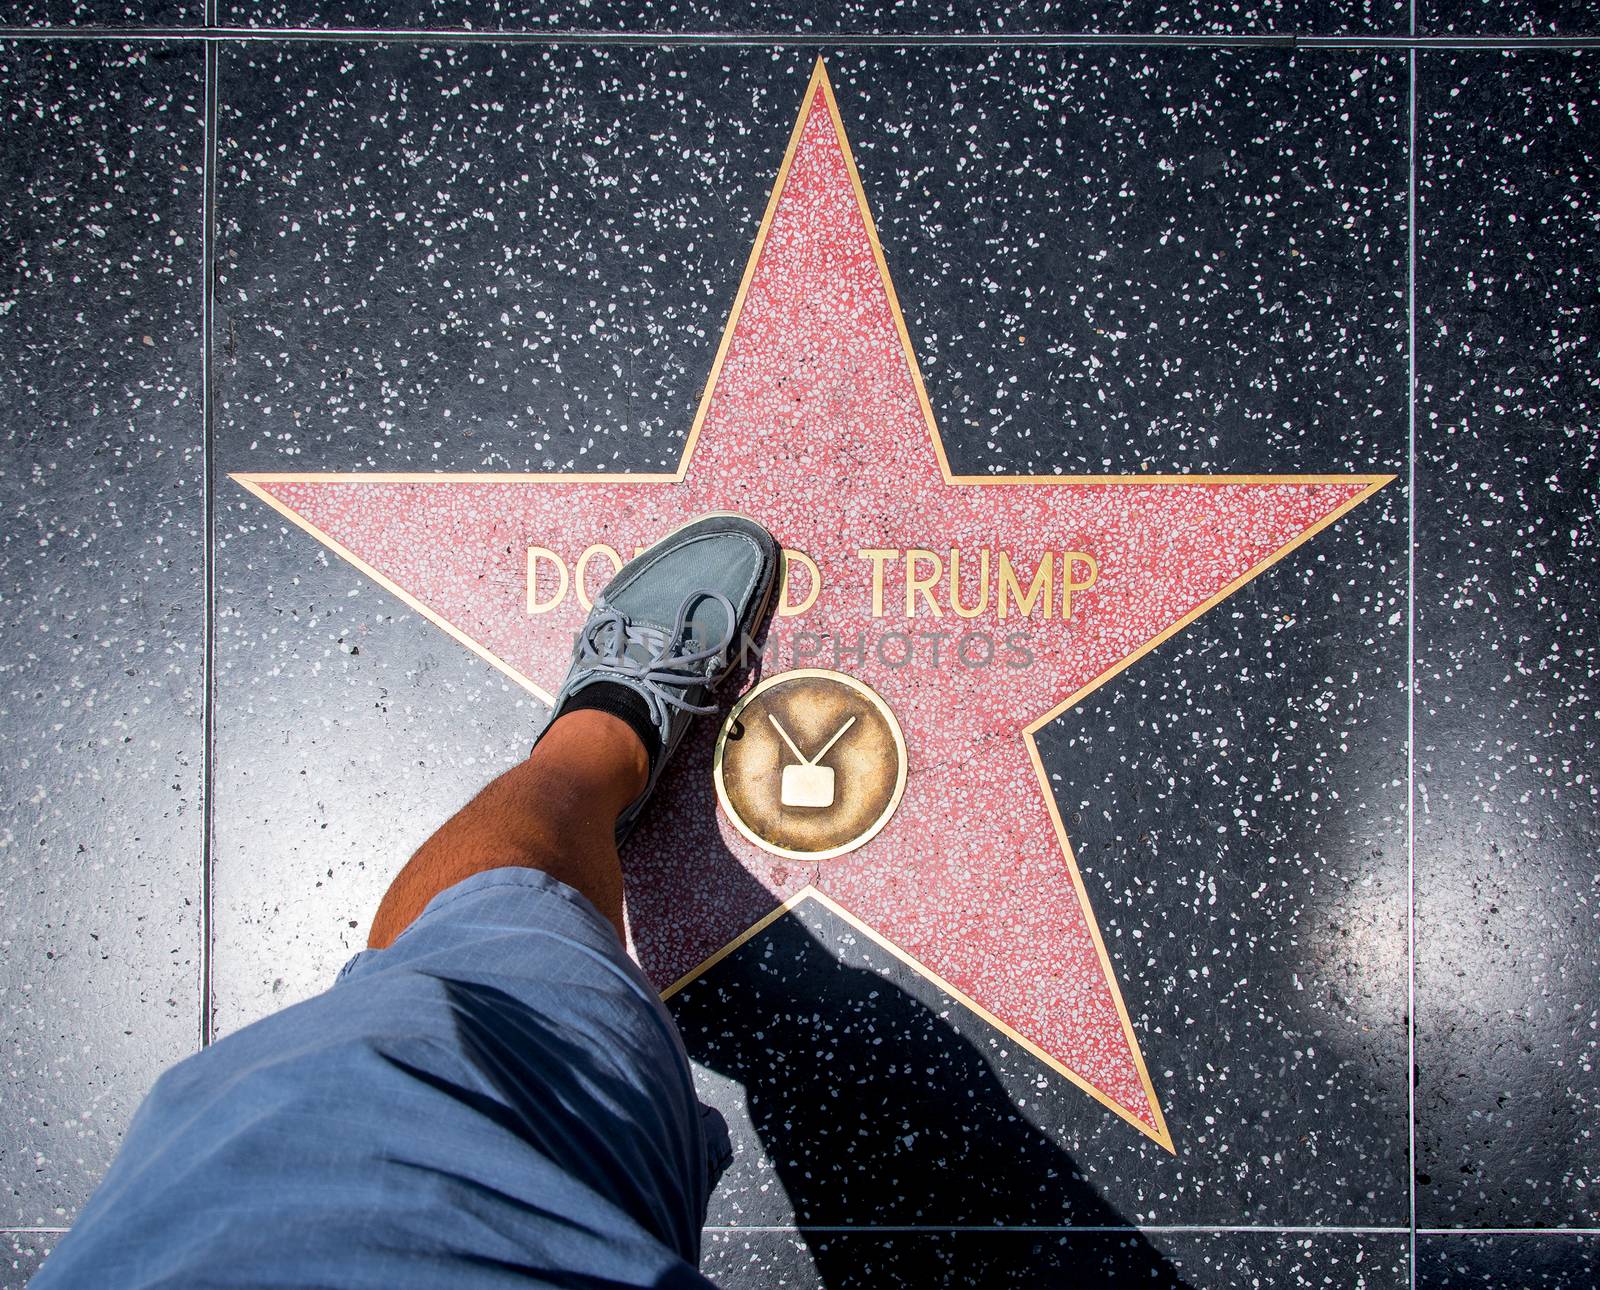 Los Angeles, USA - August 5, 2016: Man stepping on Donald Trump Star before it was damaged at Walk of Fame on Hollywood Boulevard, Los Angeles, on August 5th 2016.